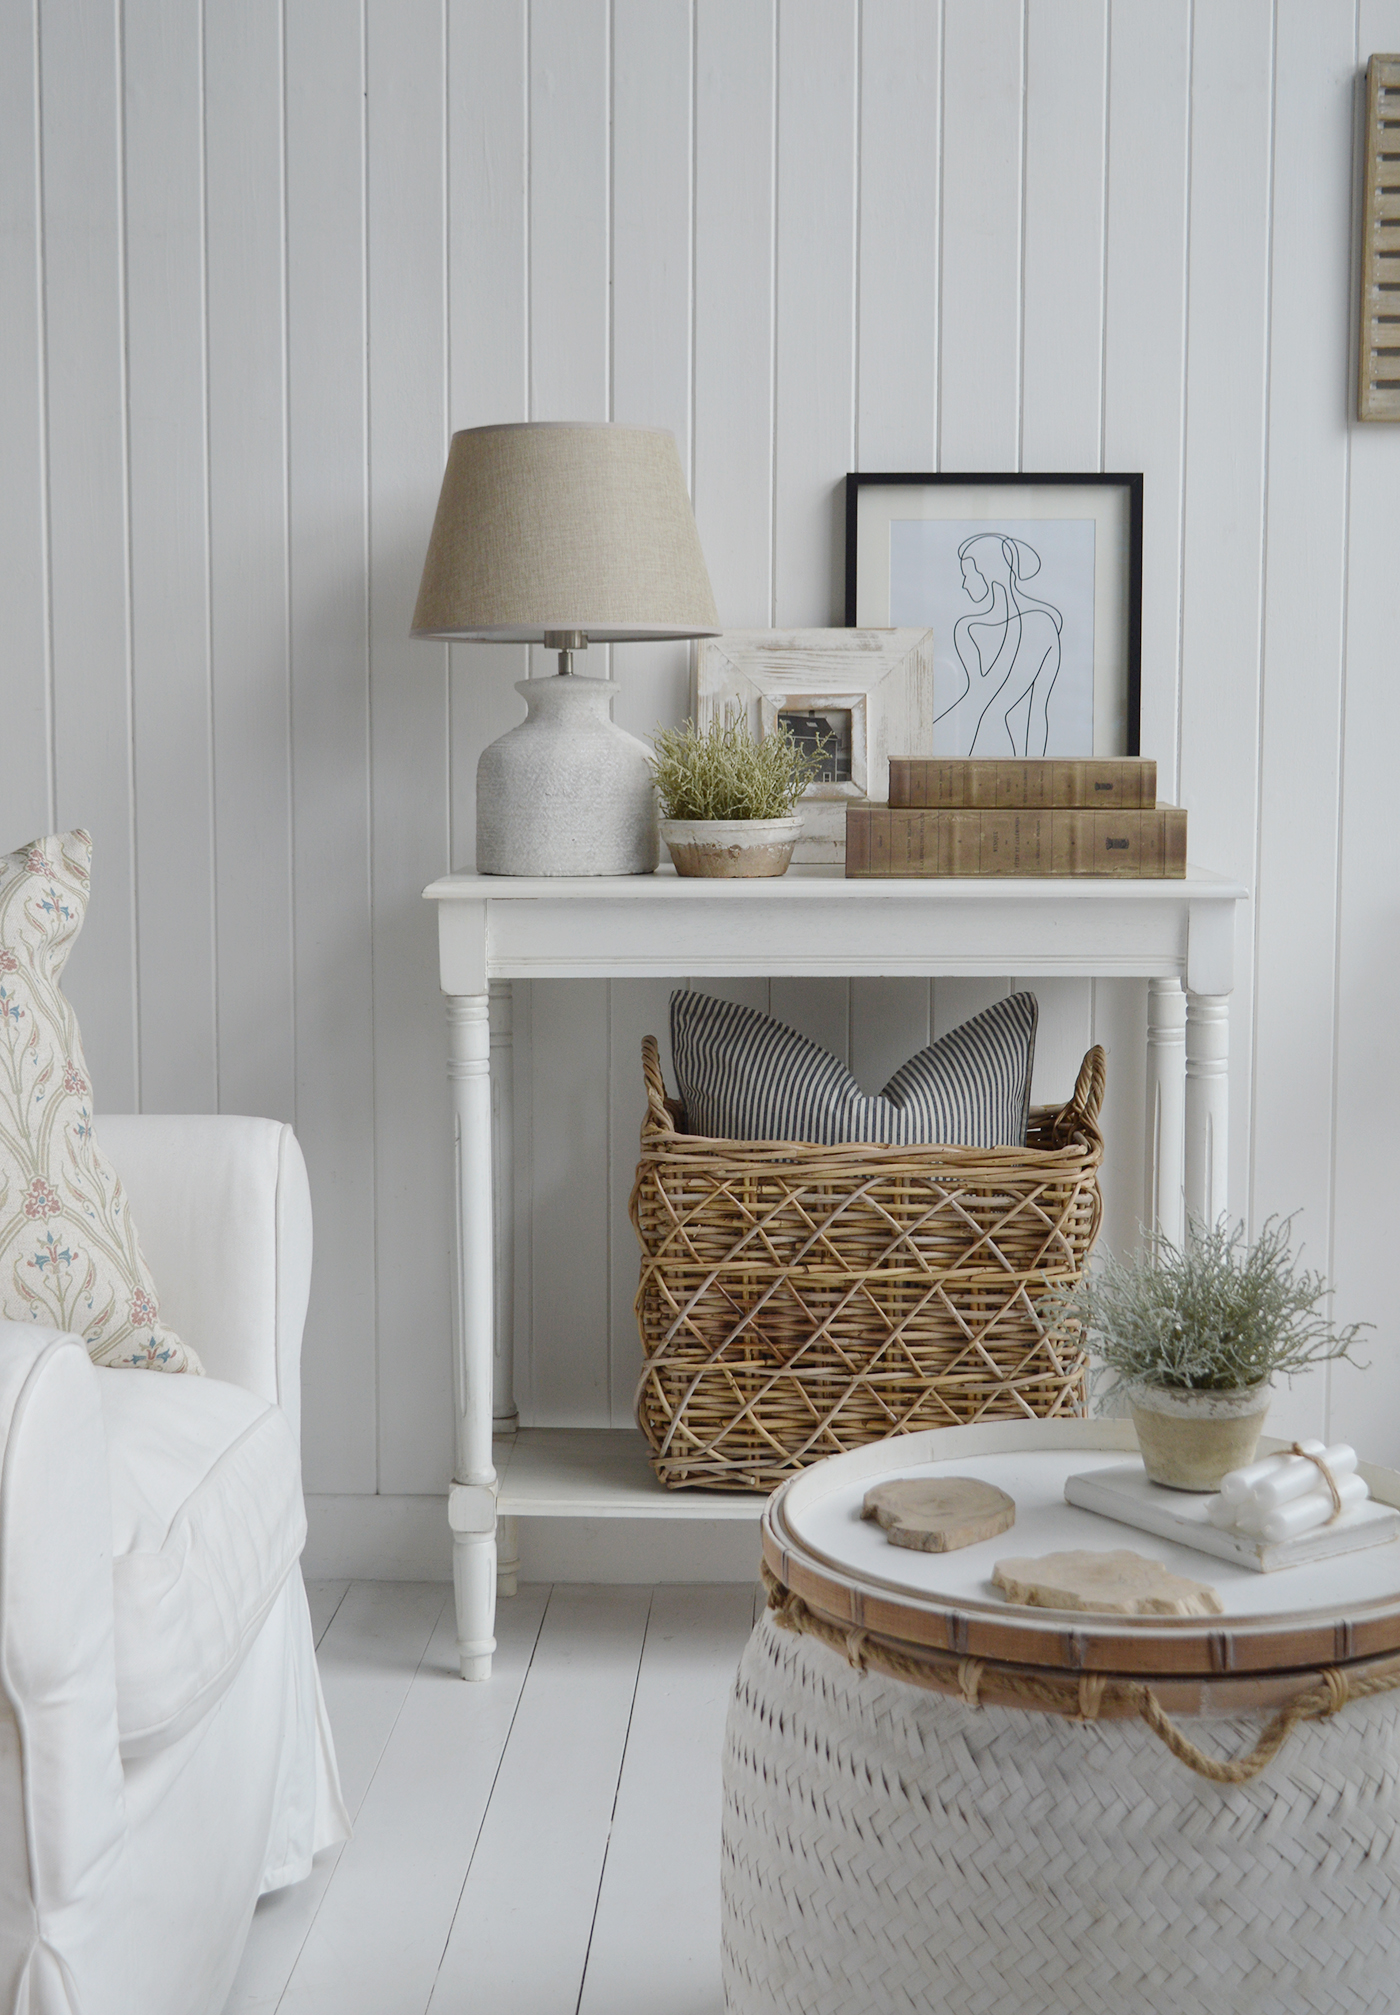 Cape Ann White beach house style coastal white console table with a shelf, shown here with the Casco Bay basket under for storage